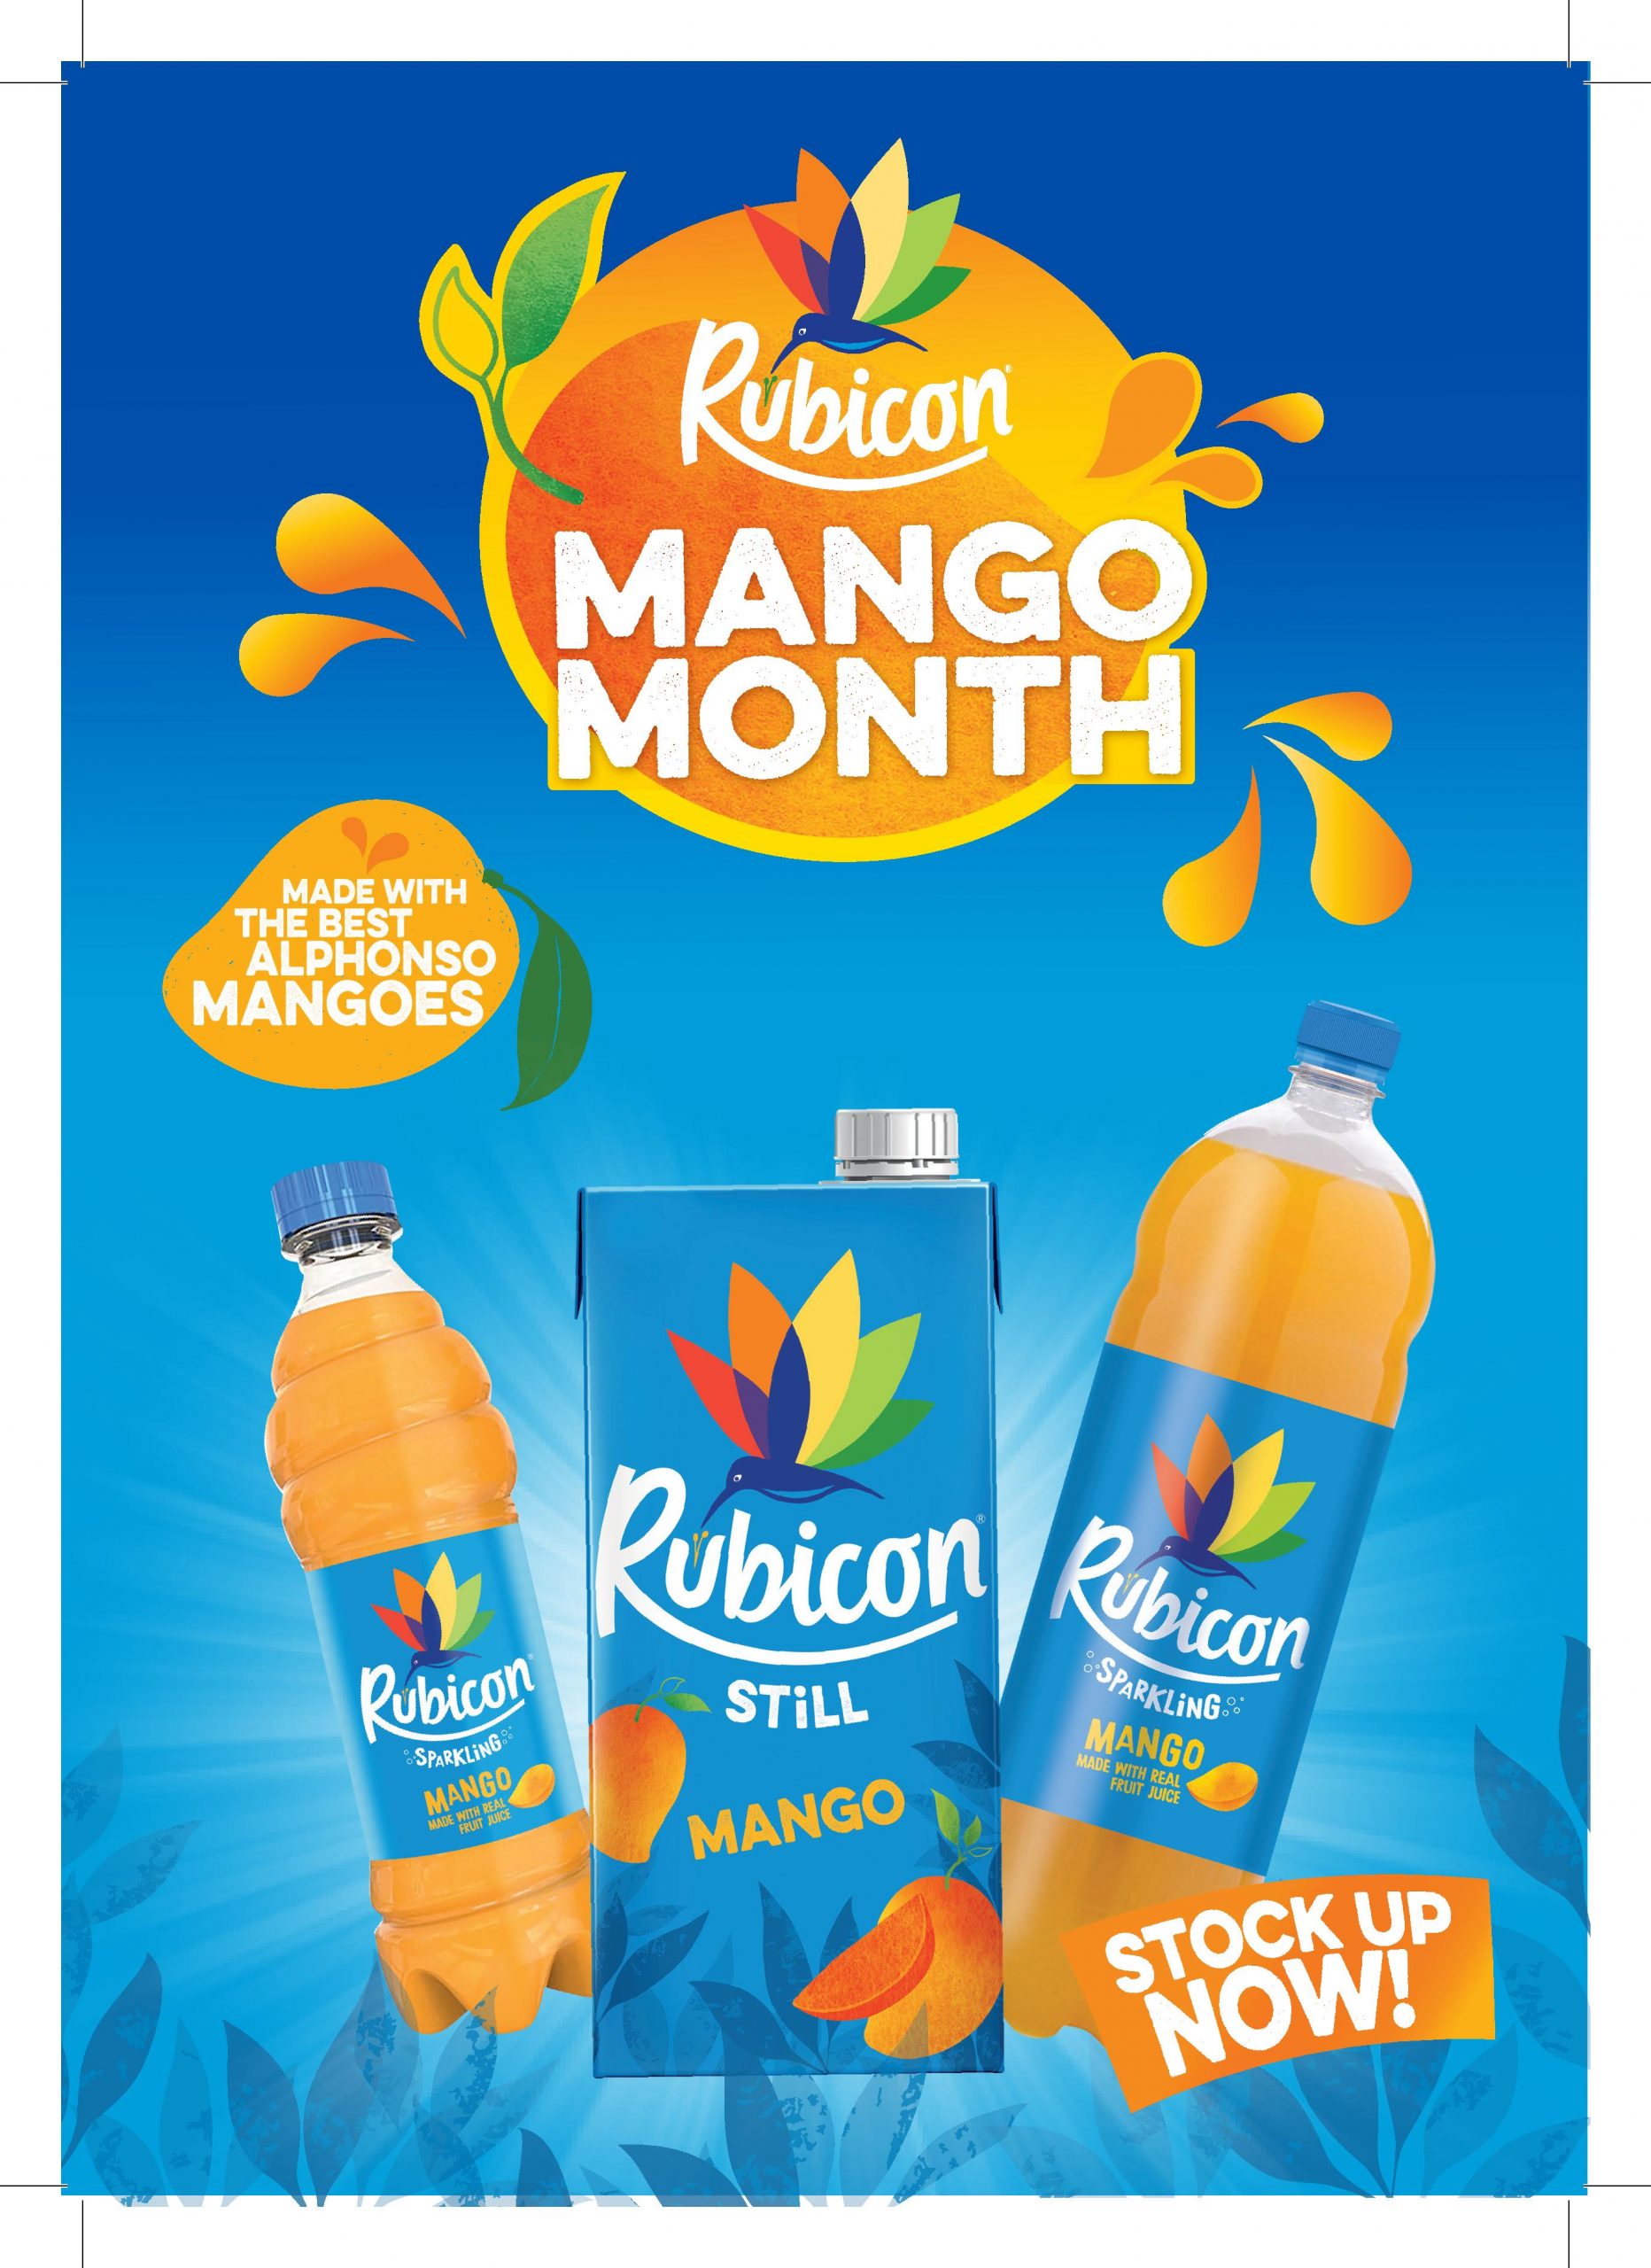 Barr Soft Drinks relaunches Mango Month